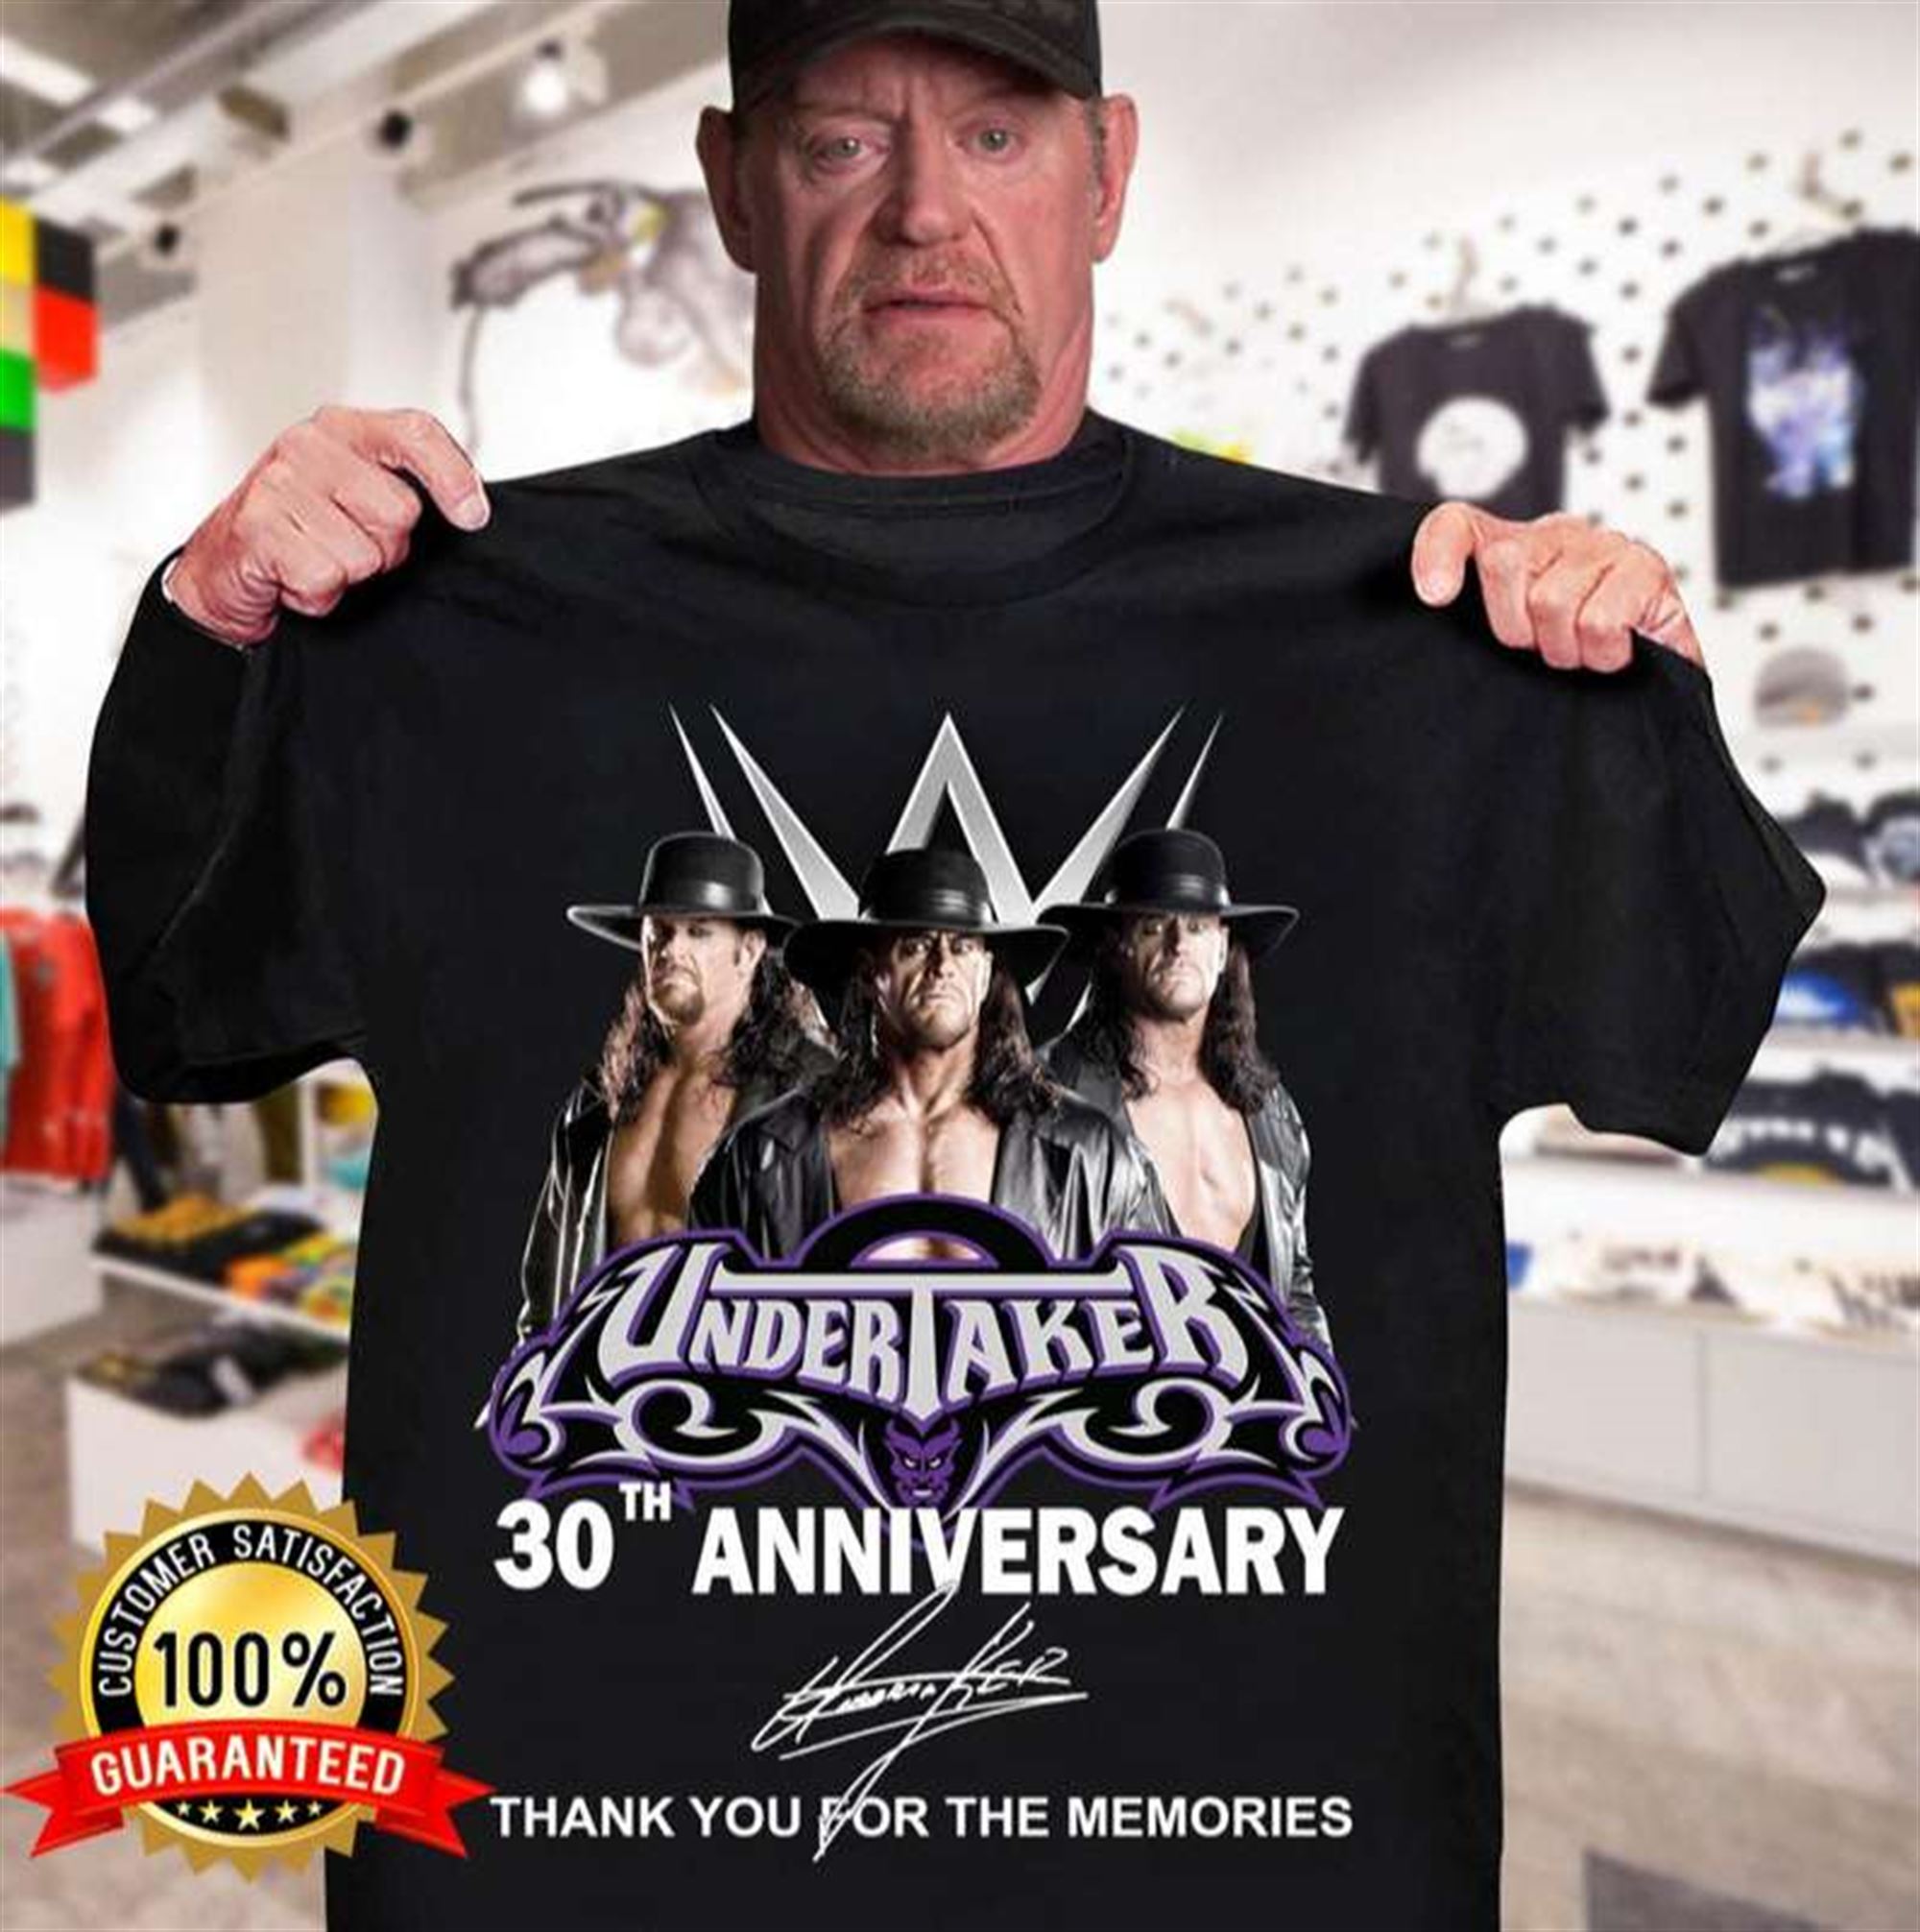 Undertaker 30th Anniversary Thank You For The Memories T Shirt Full Size Up To 5xl